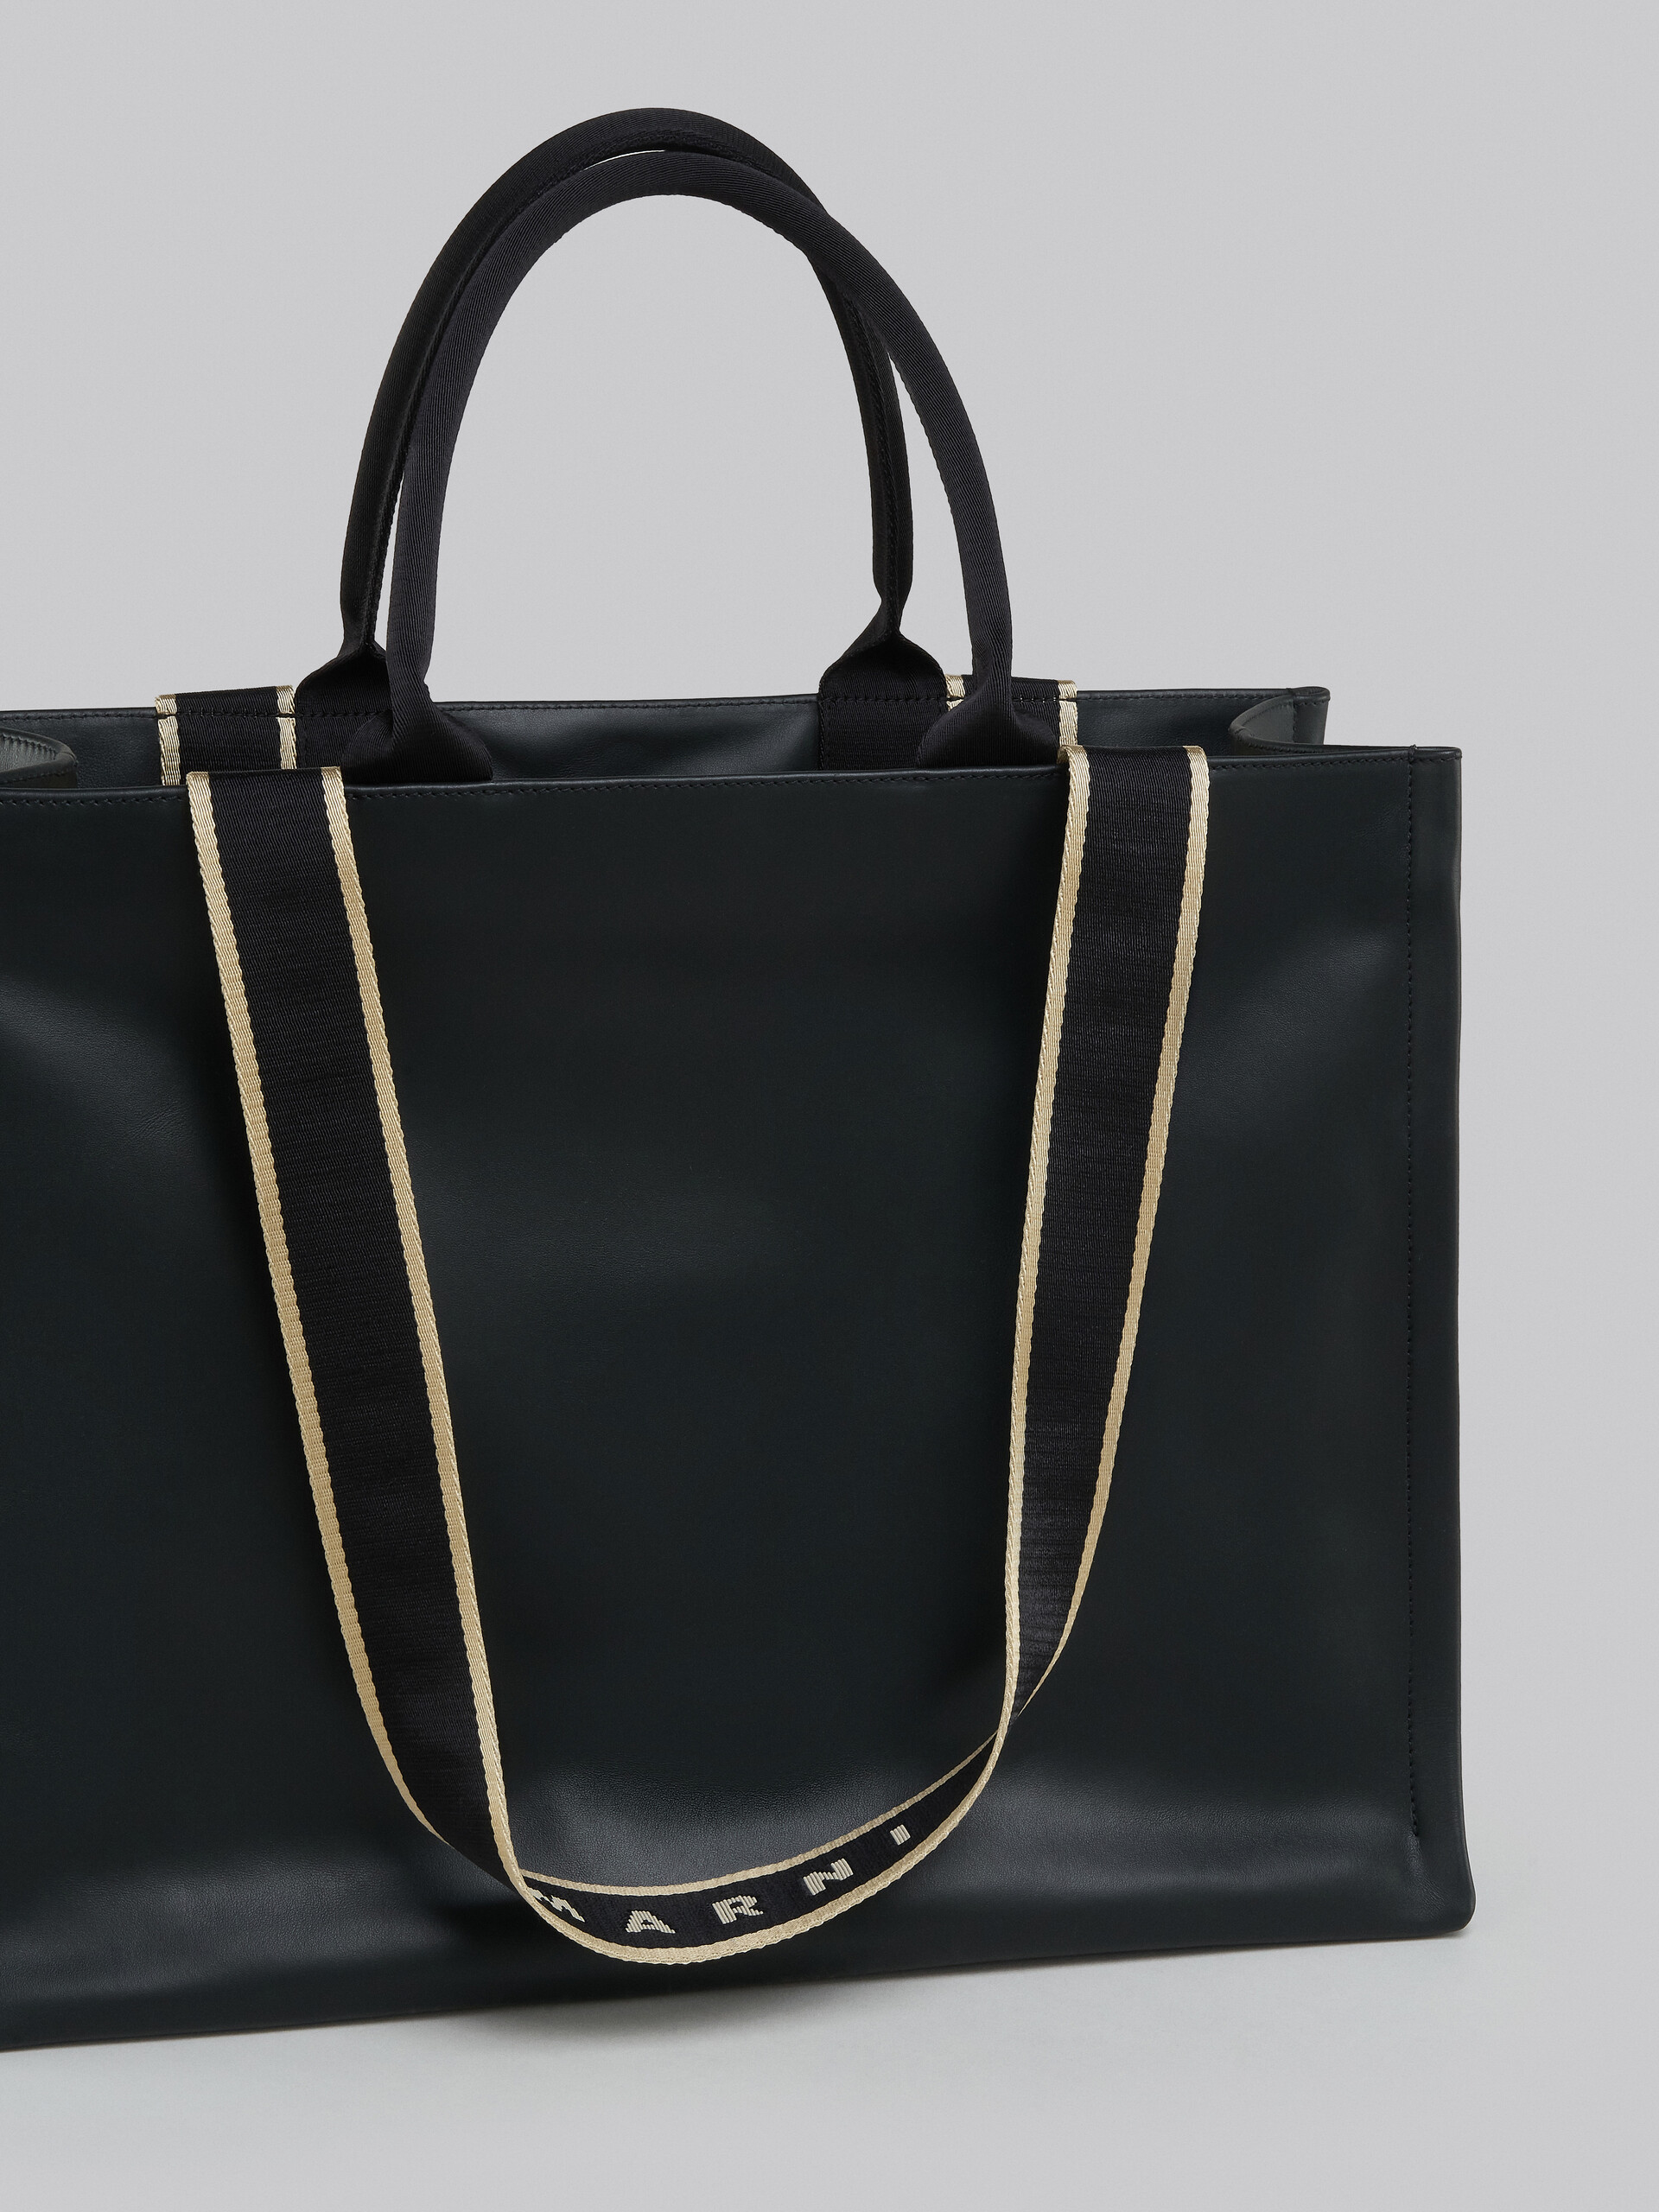 Bey Tote Bag in black leather - Shopping Bags - Image 4